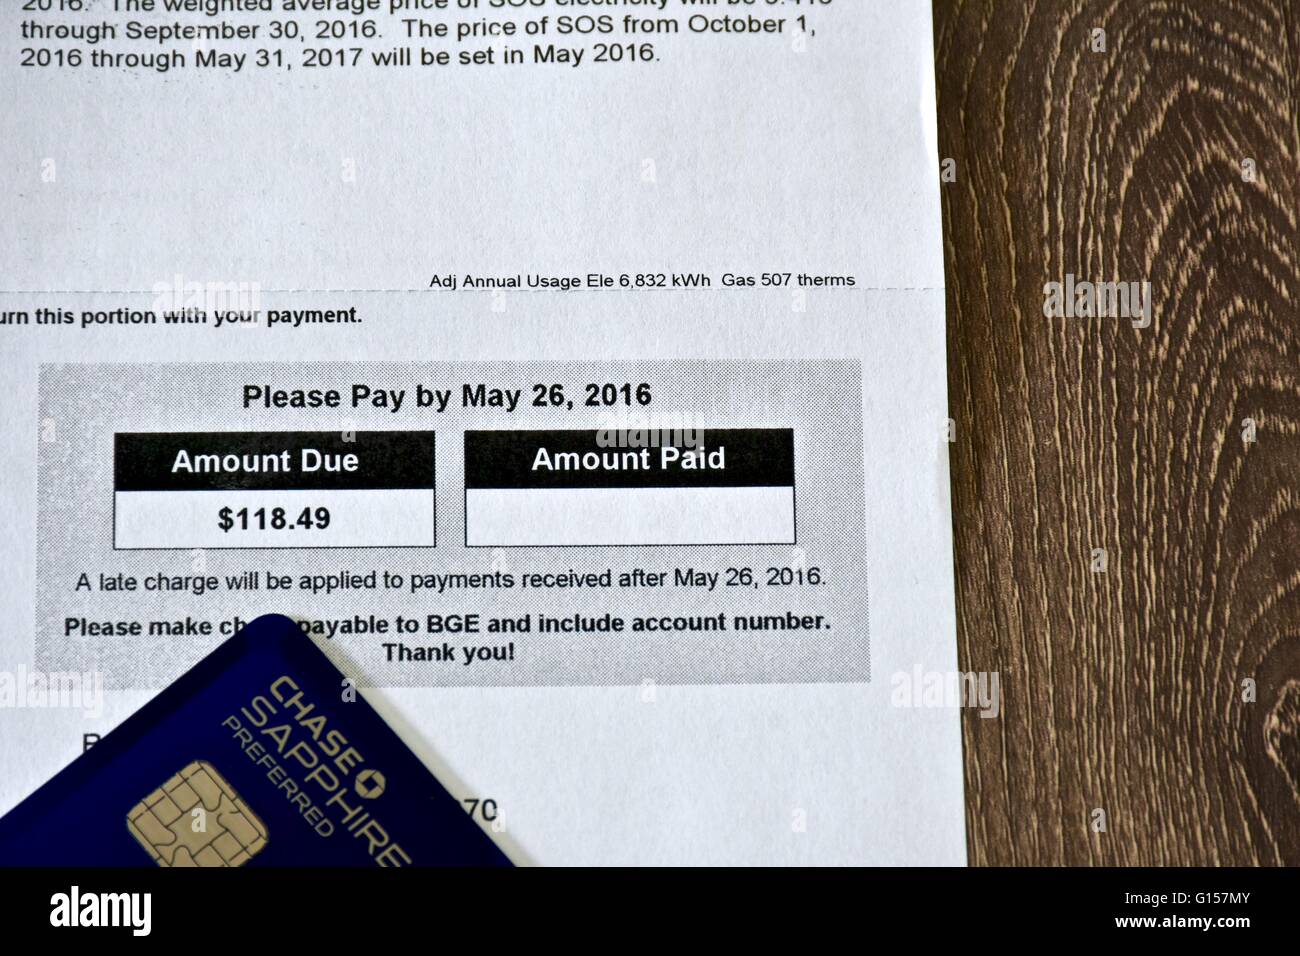 Utility bill laying on a wood surface next to the Chase Sapphire Preferred ultimate rewards credit card. Stock Photo